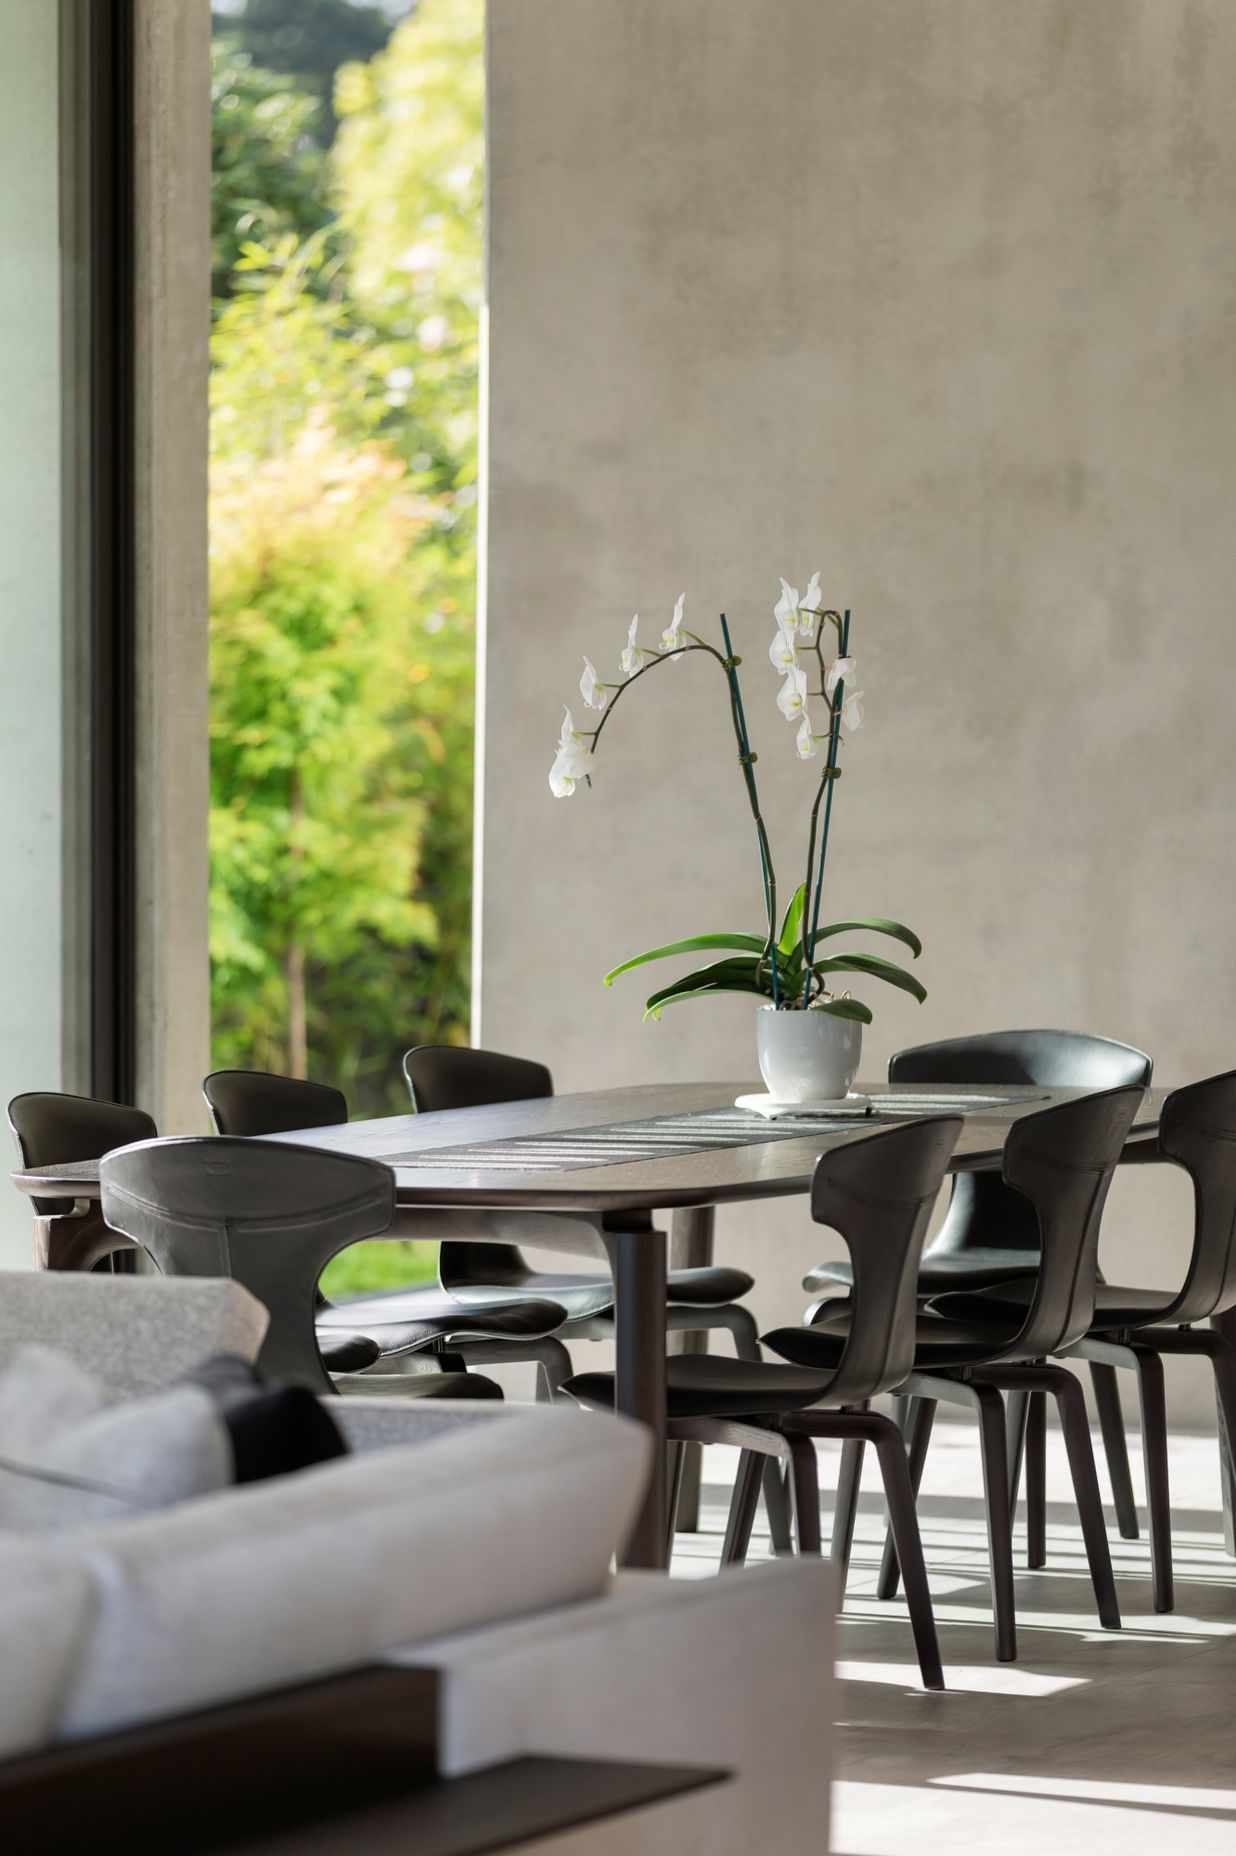 The dining area utilises a harmonious monochromatic materials palette, overlooking the bamboo hedging and small courtyard.